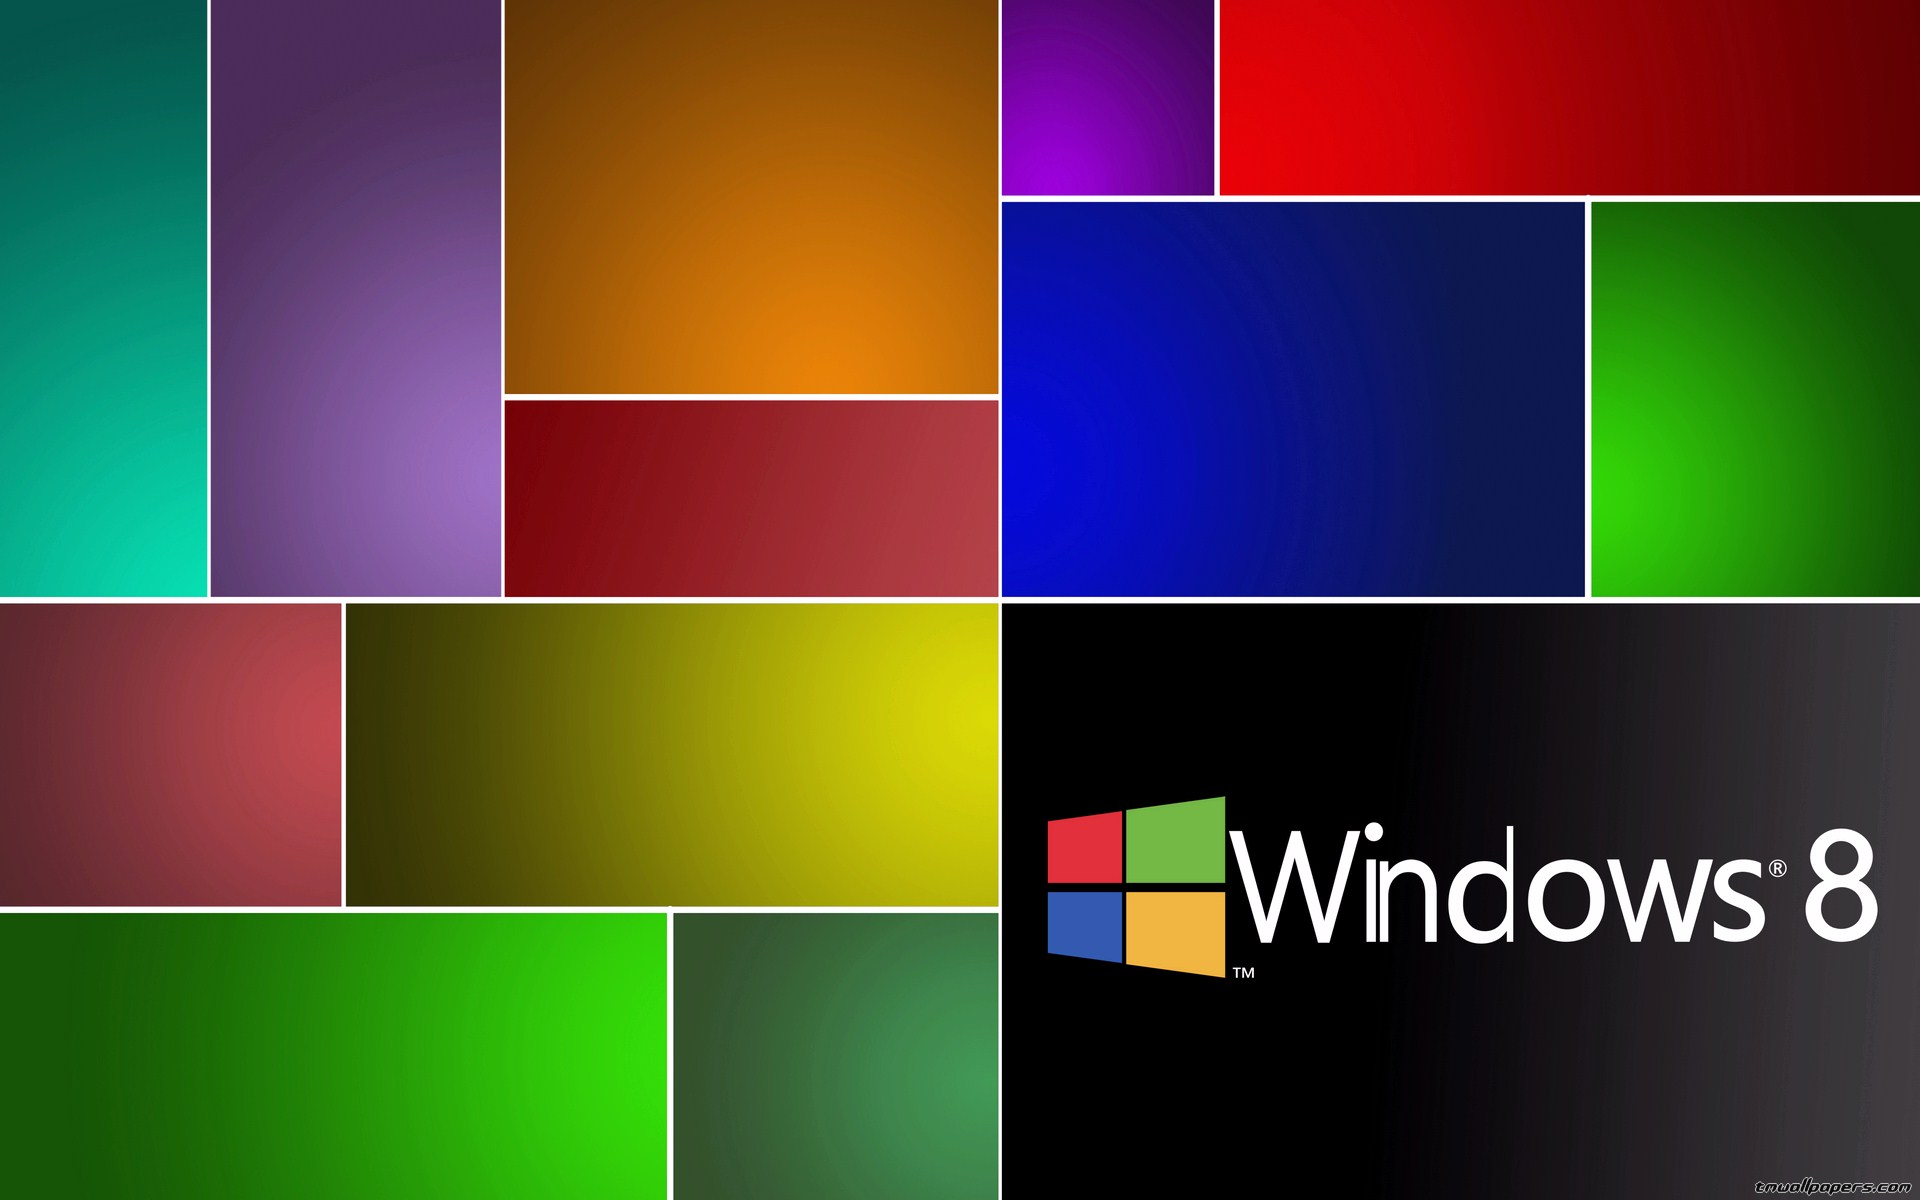 Wide wallpapers e HD wallpapers - Windows 8 wallpapers pack